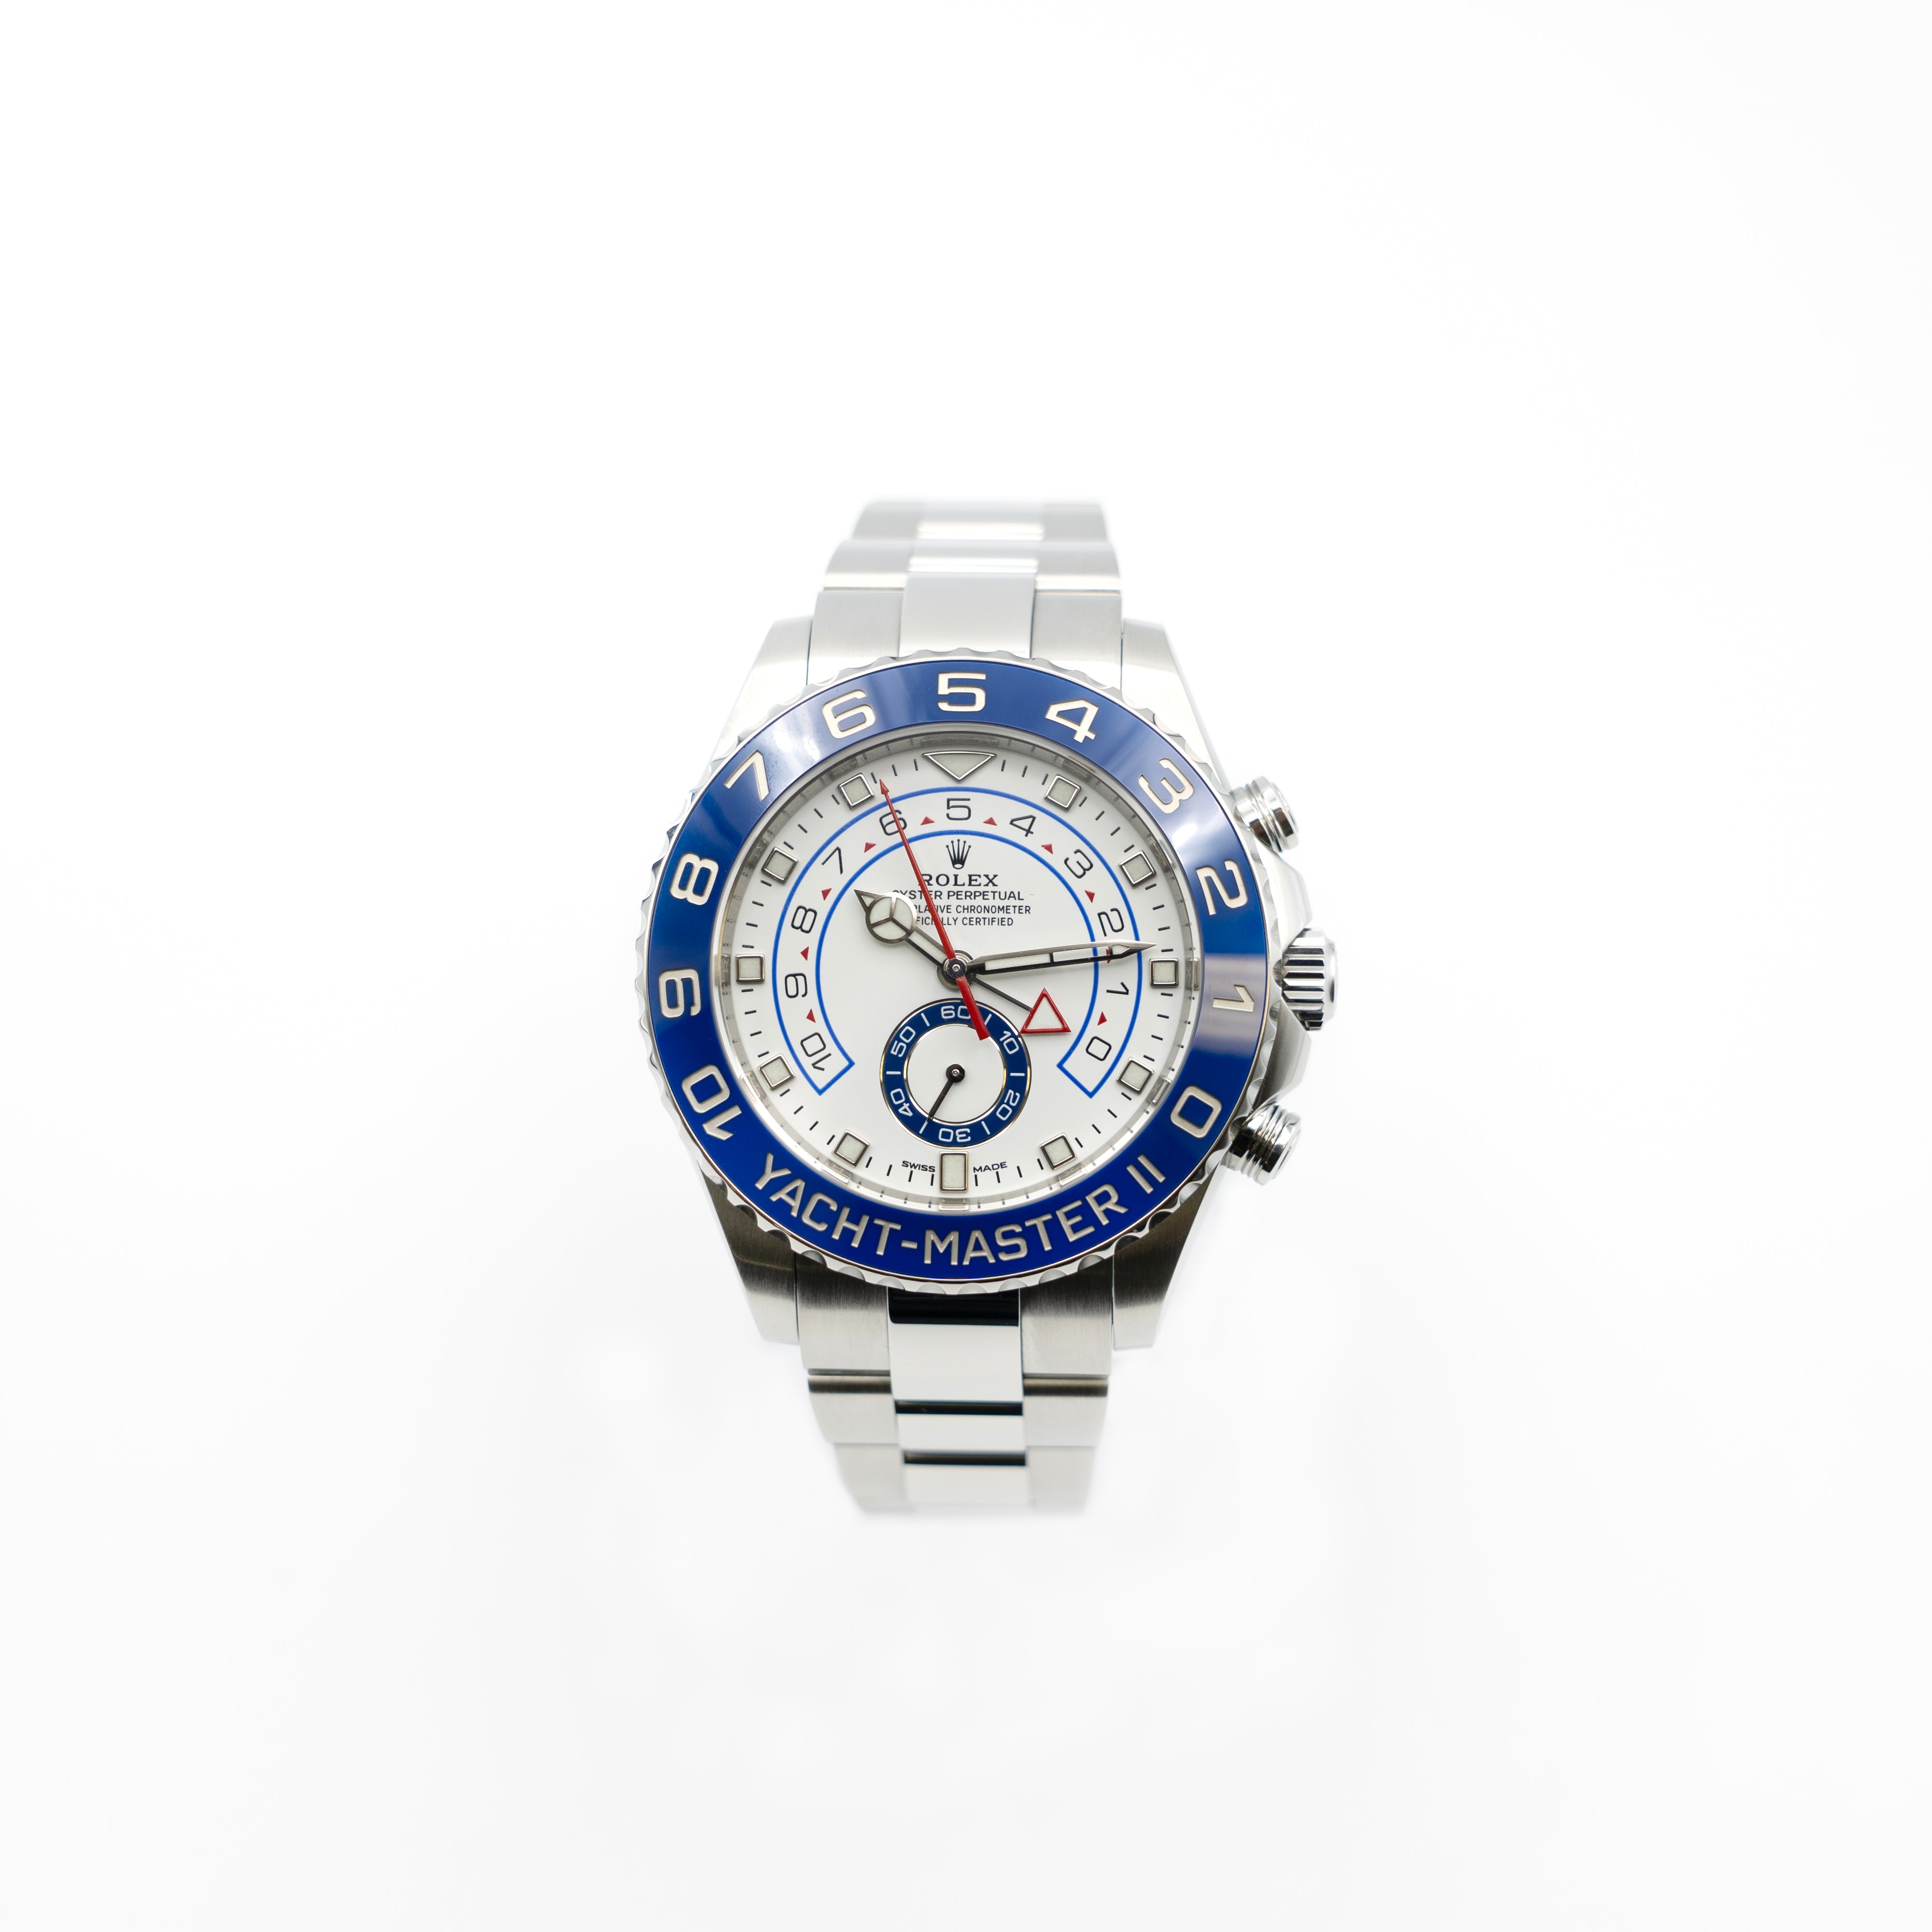 Bright Blue Strap for This Amazing Rolex Yacht Master! Yes or No